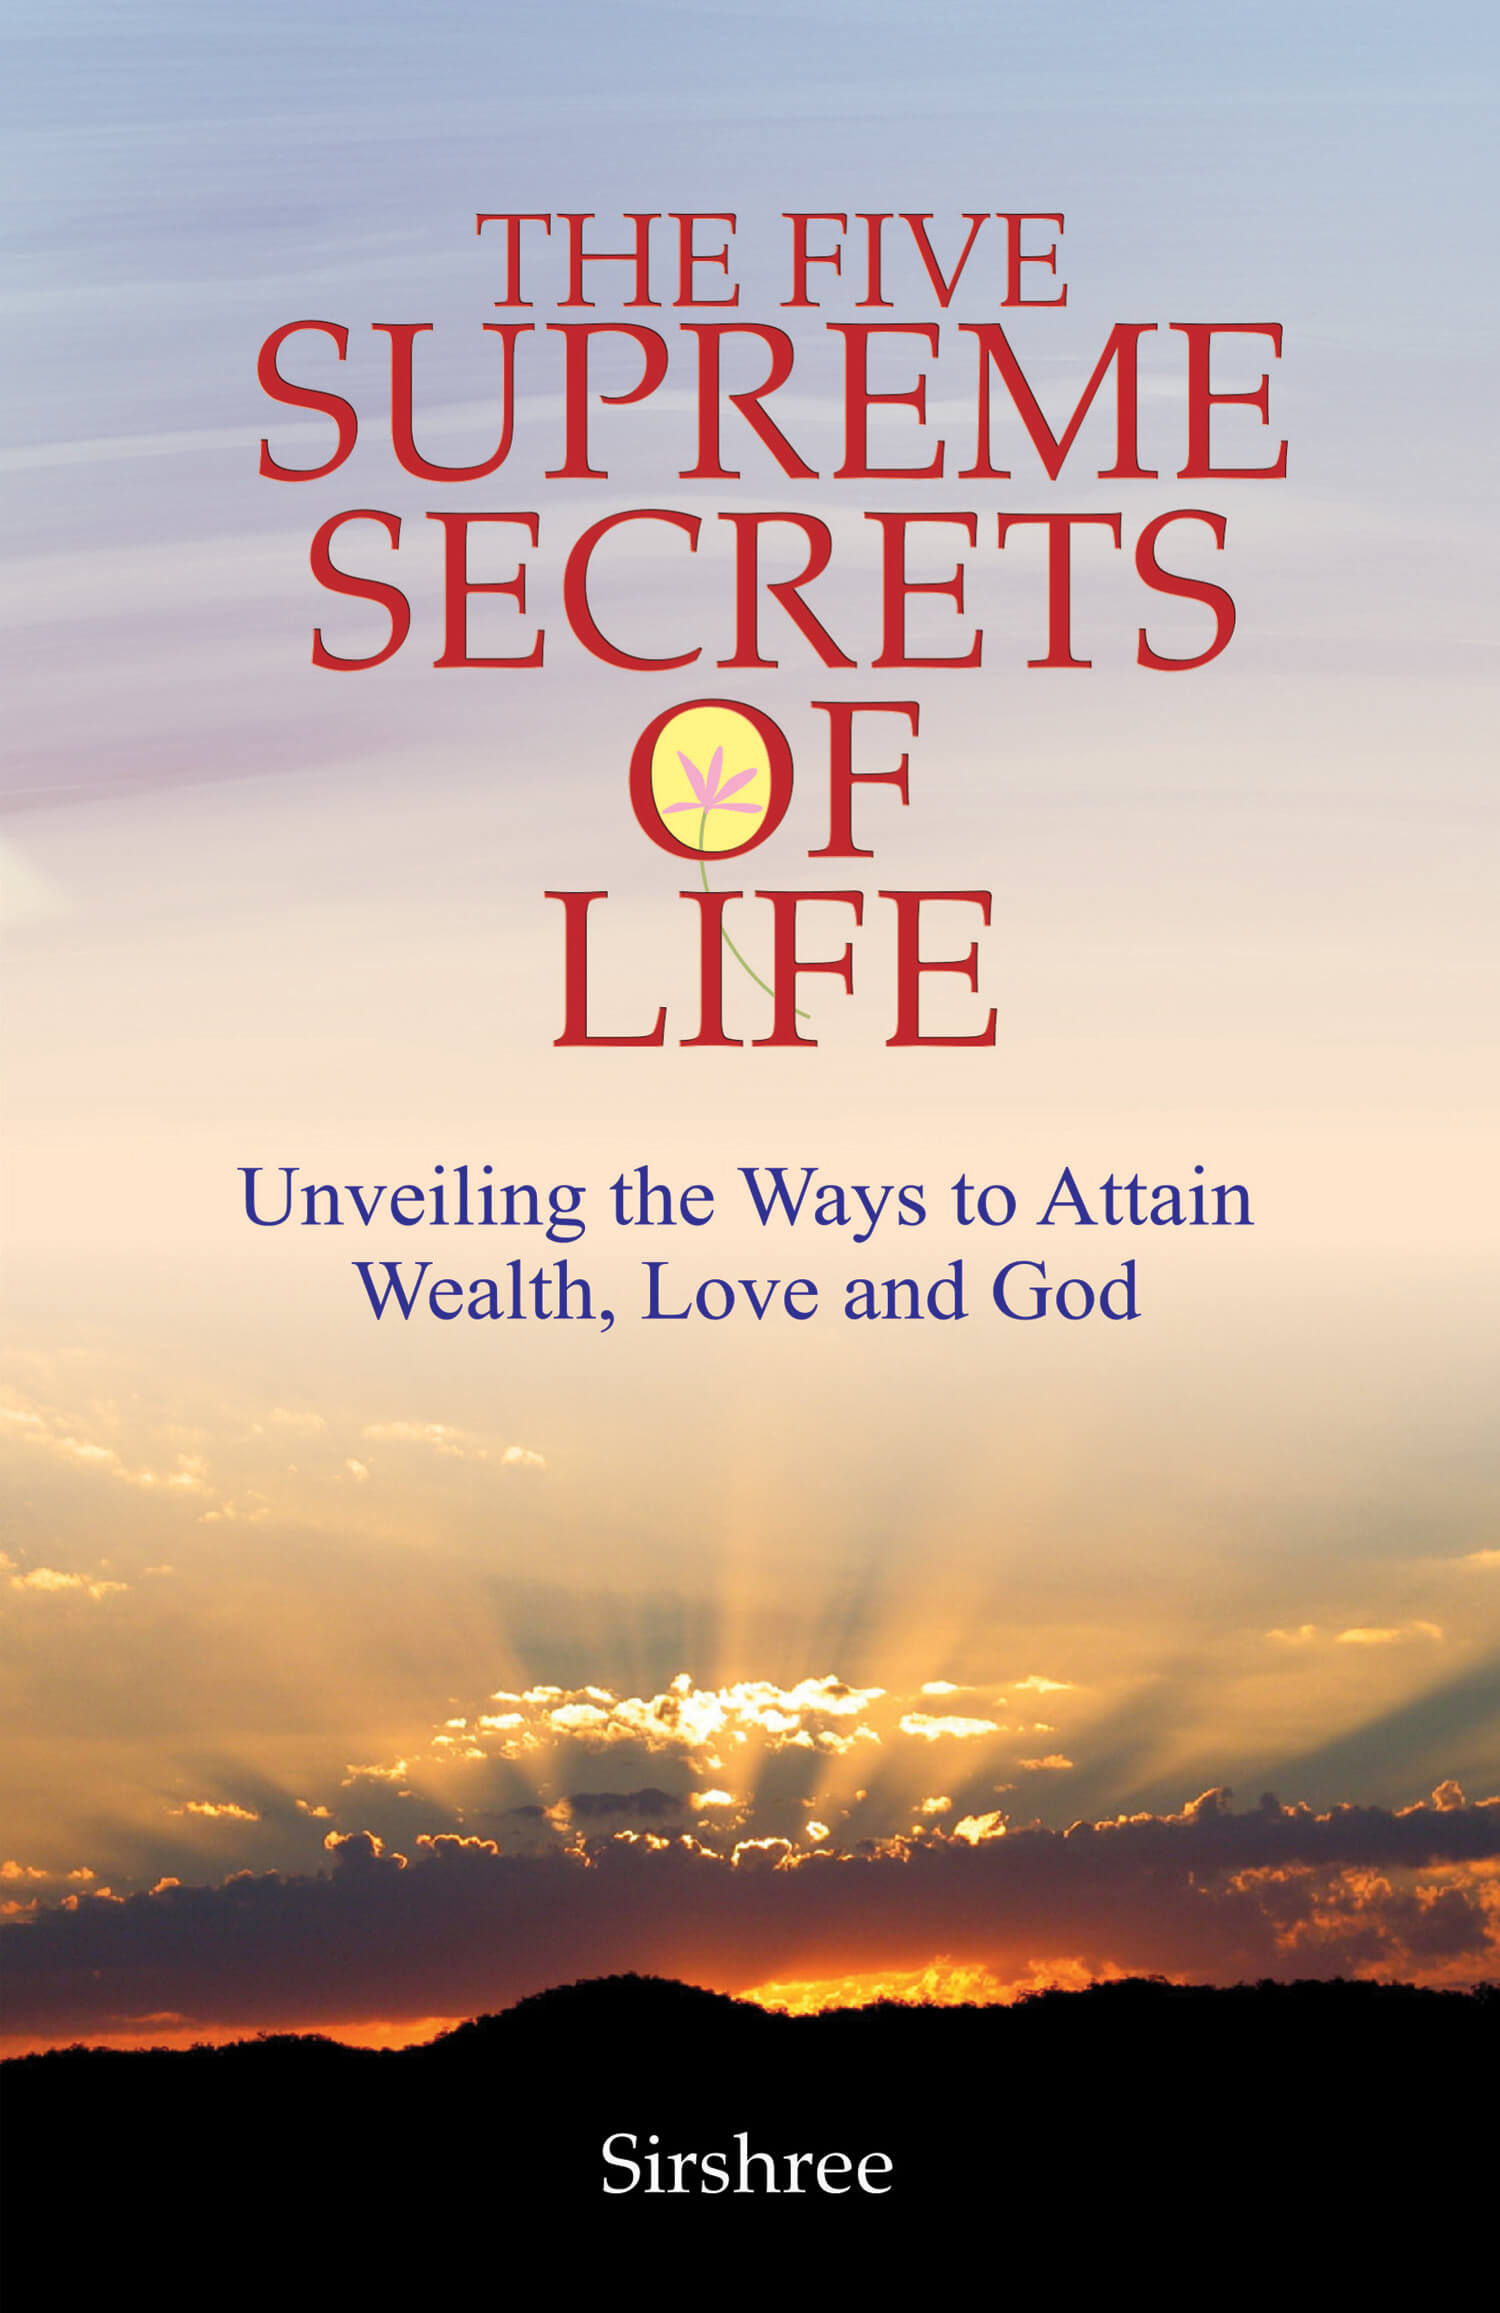 The Five Supreme Secrets Of Life: Unveiling The Ways To Attain Wealth, Love And God